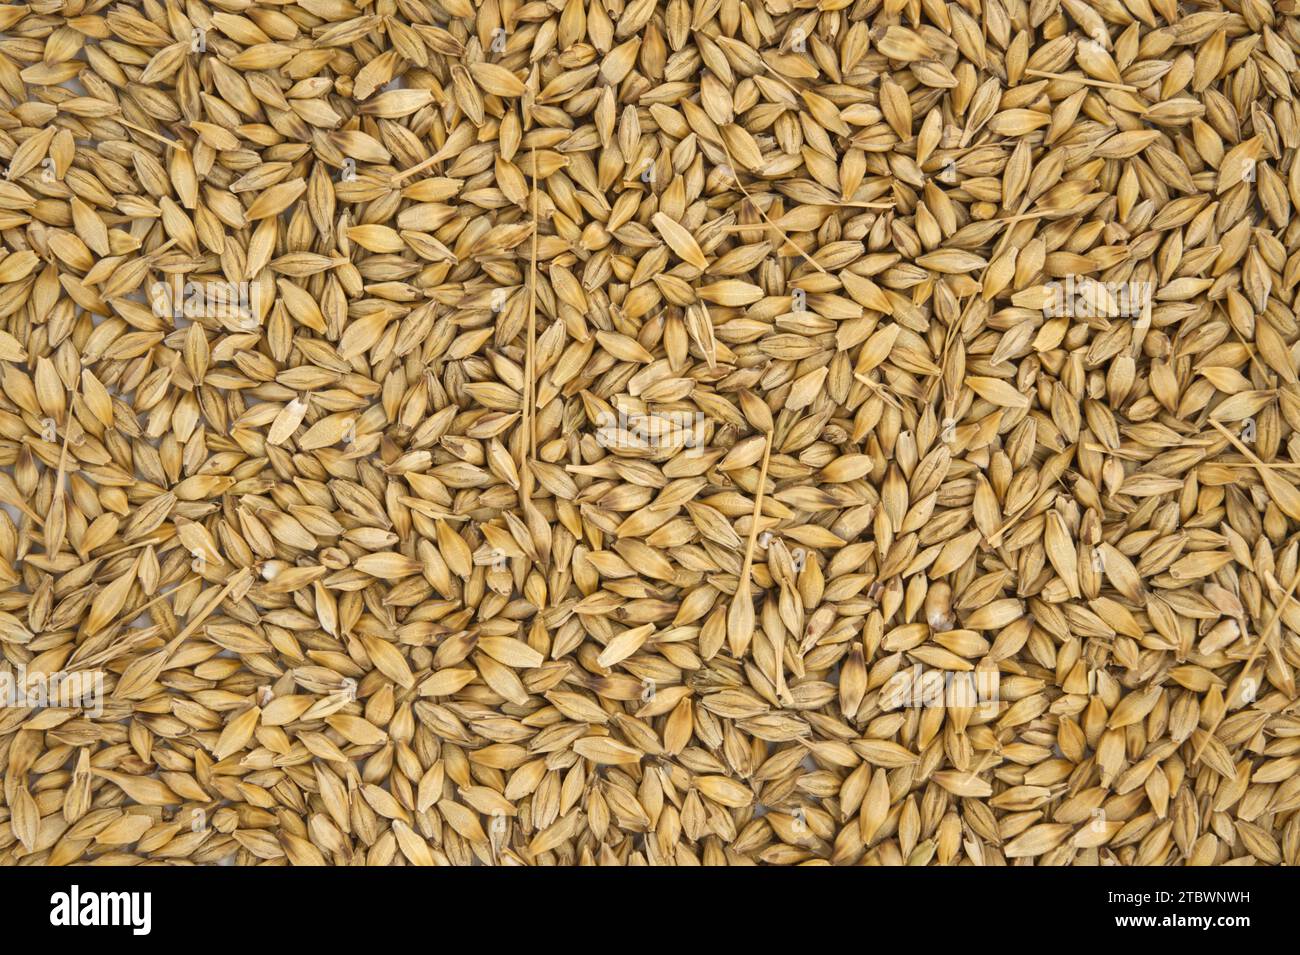 Barley (Hordeum vulgare) seeds with the outer husk, background and surface of barley grains Stock Photo